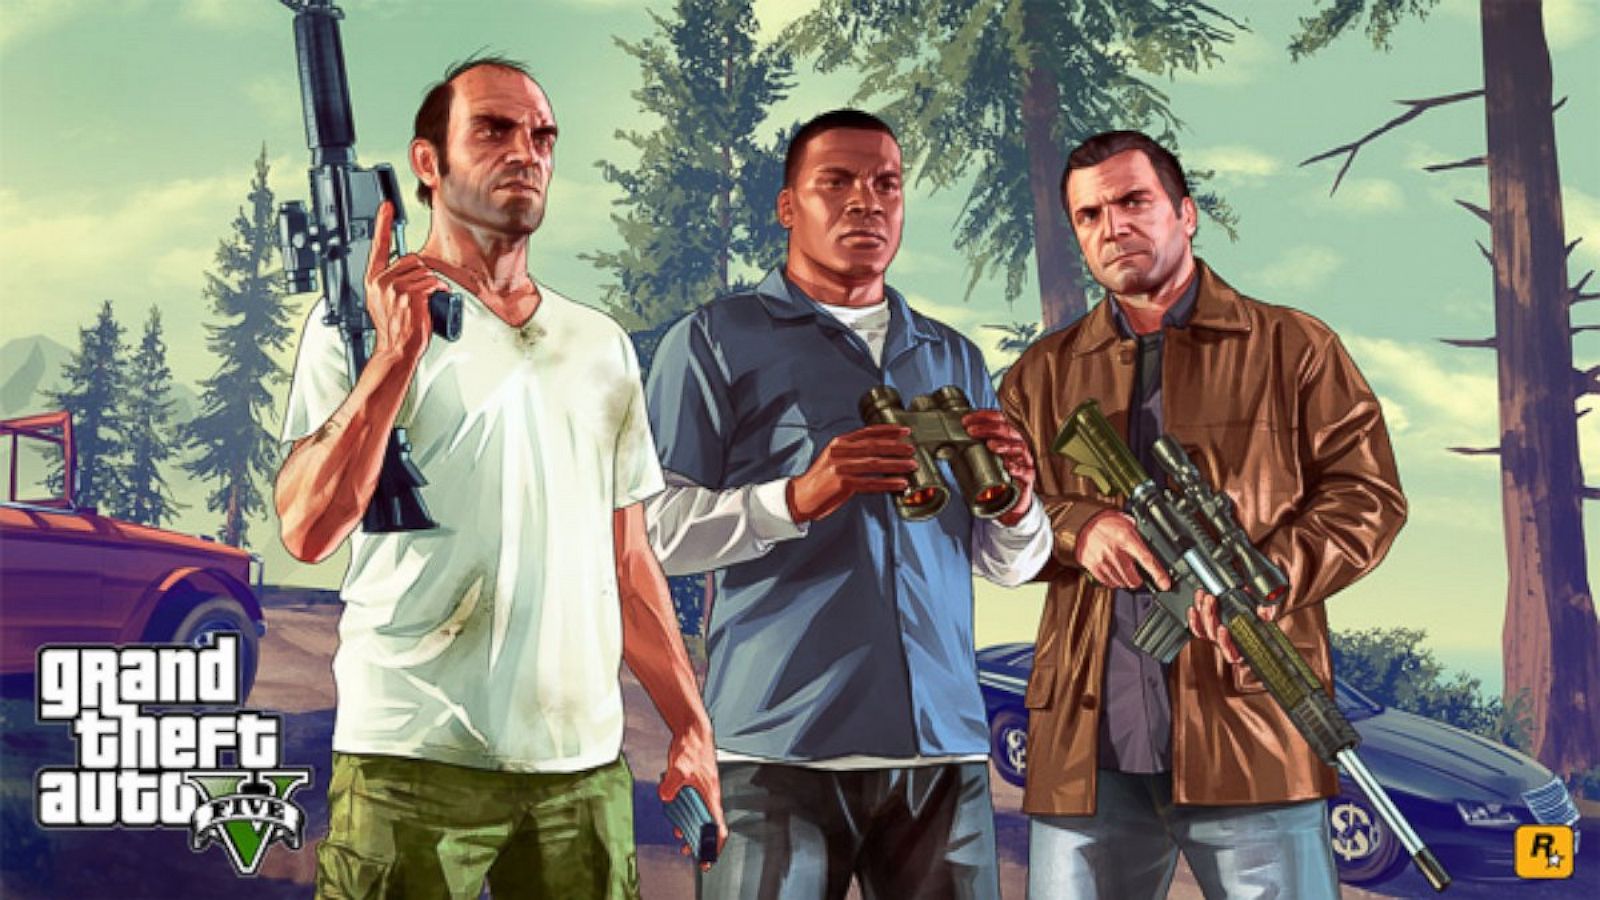 GTA V Launches: What The Latest Game in Grand Theft Auto Differently - ABC News